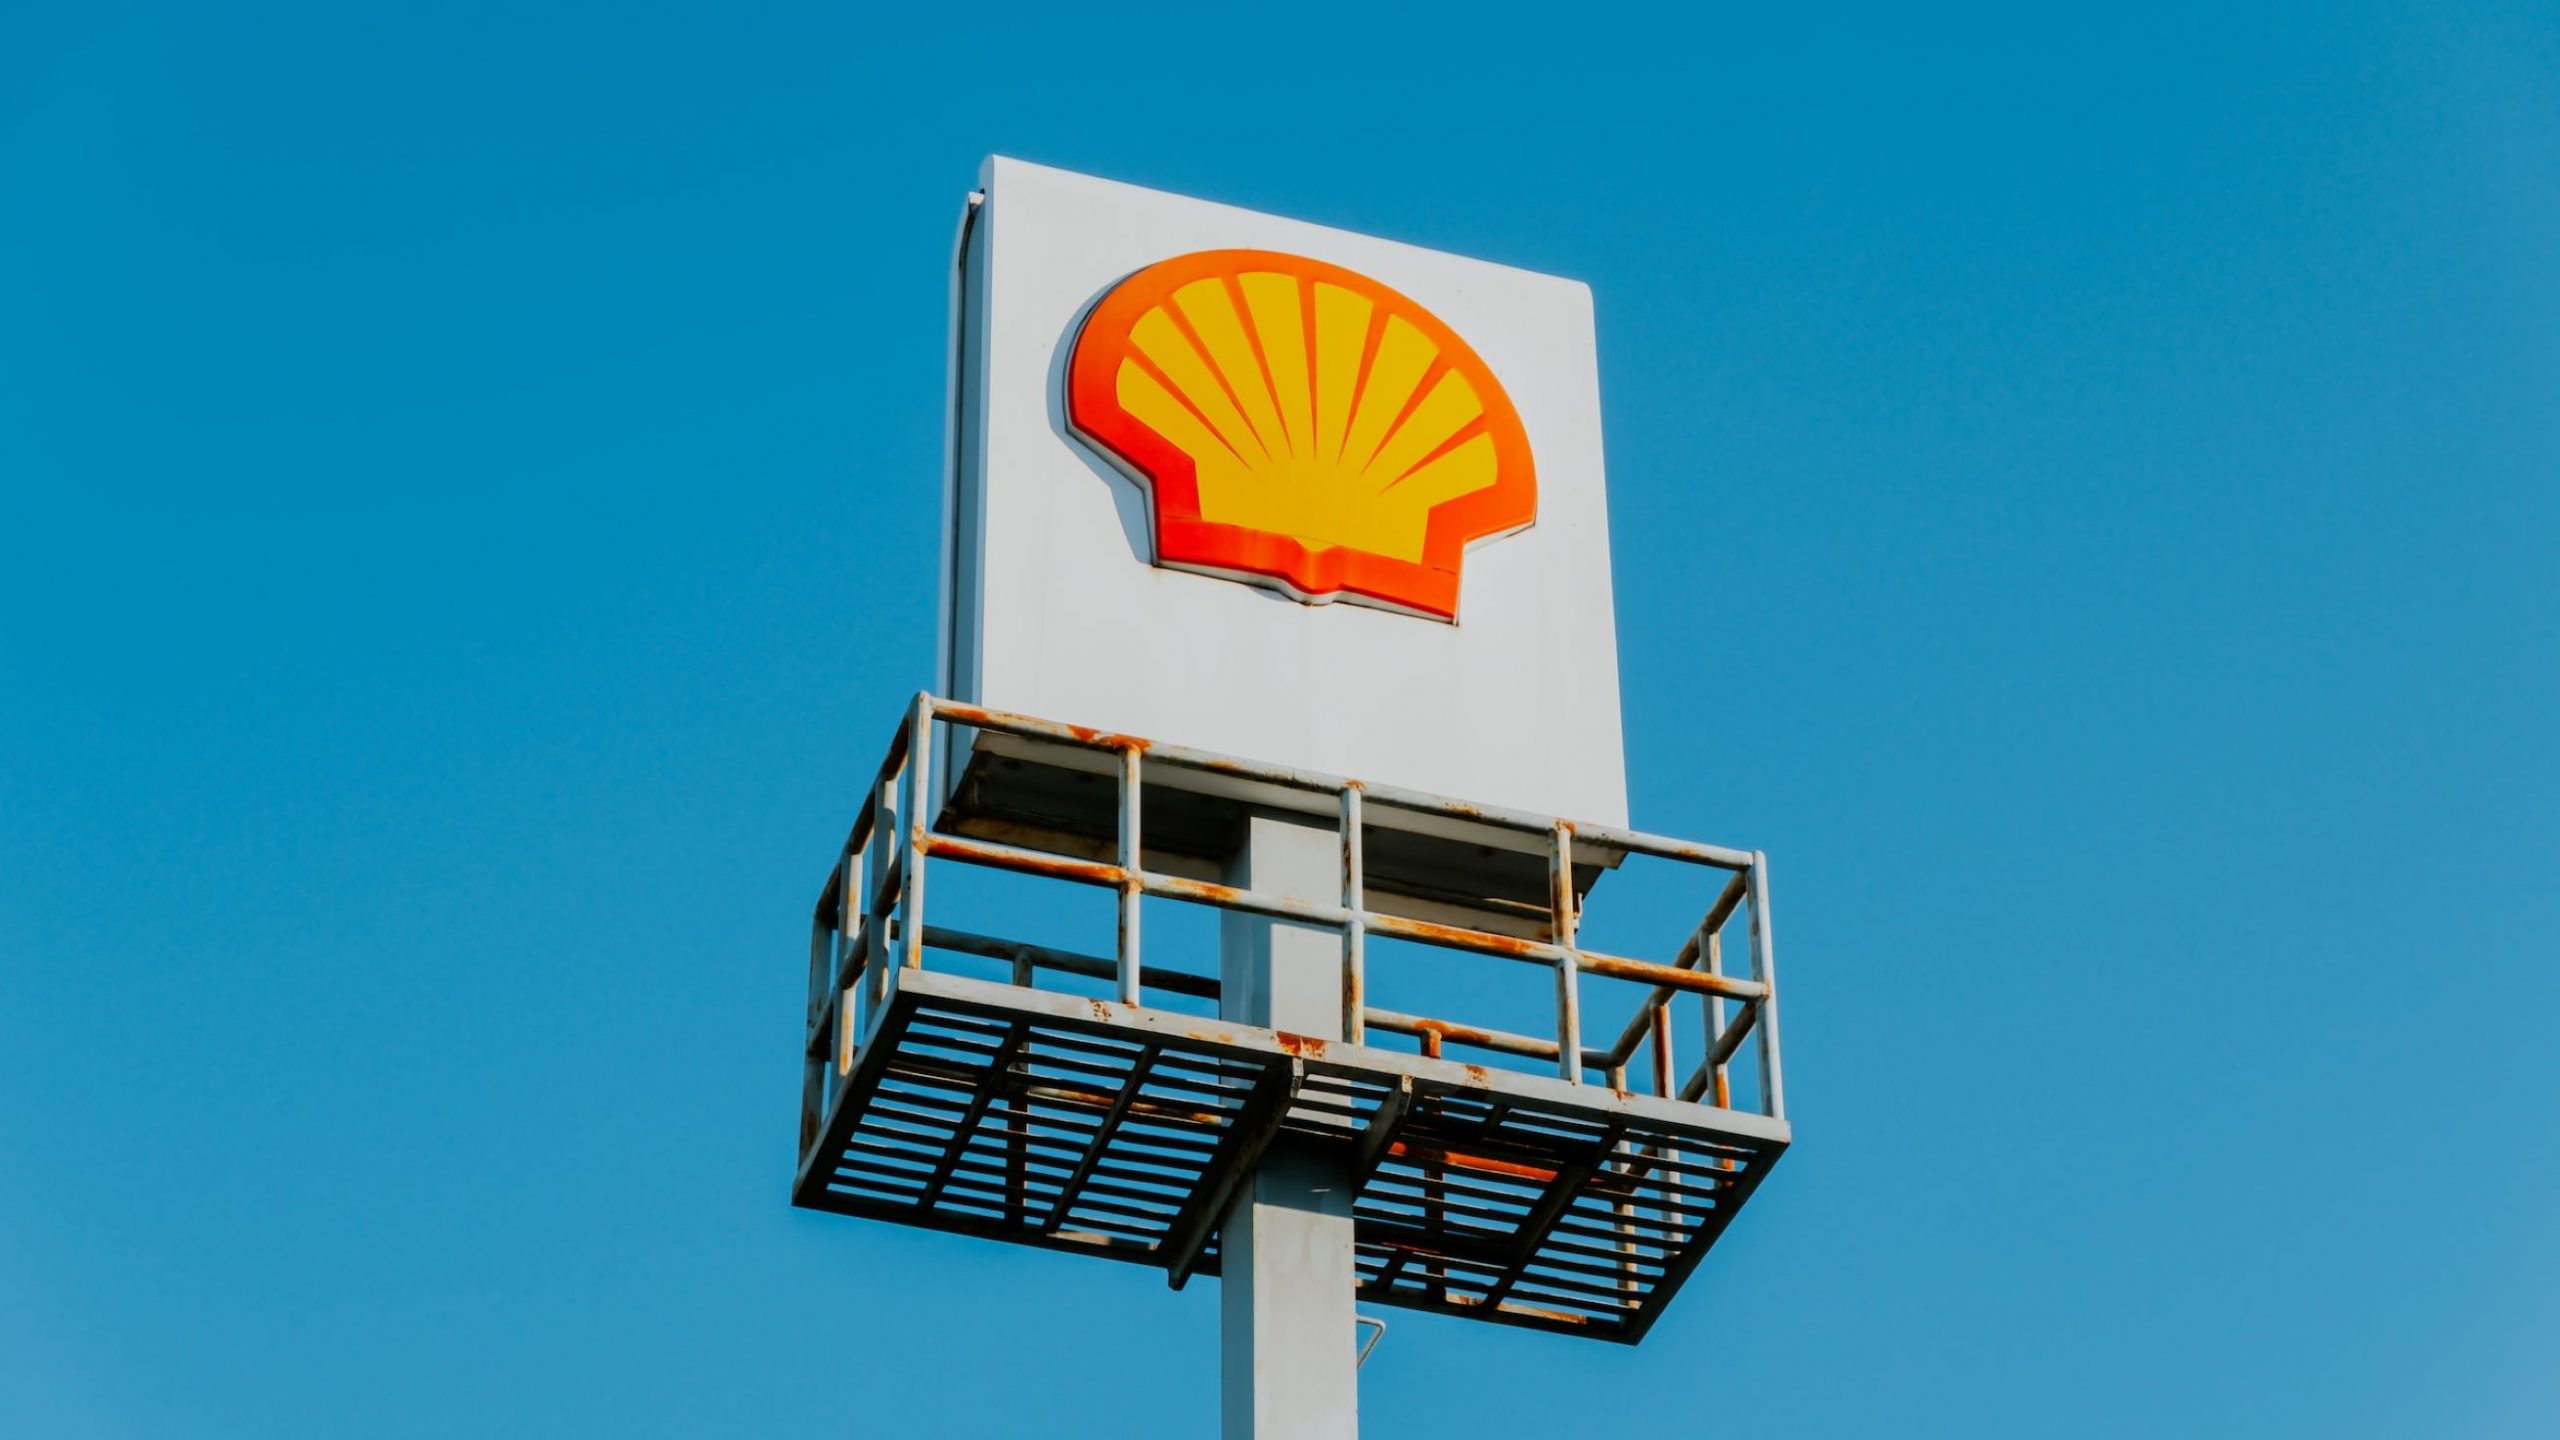 Dirty pearls: exposing Shell’s hidden legacy of climate change accountability, 1970-1990